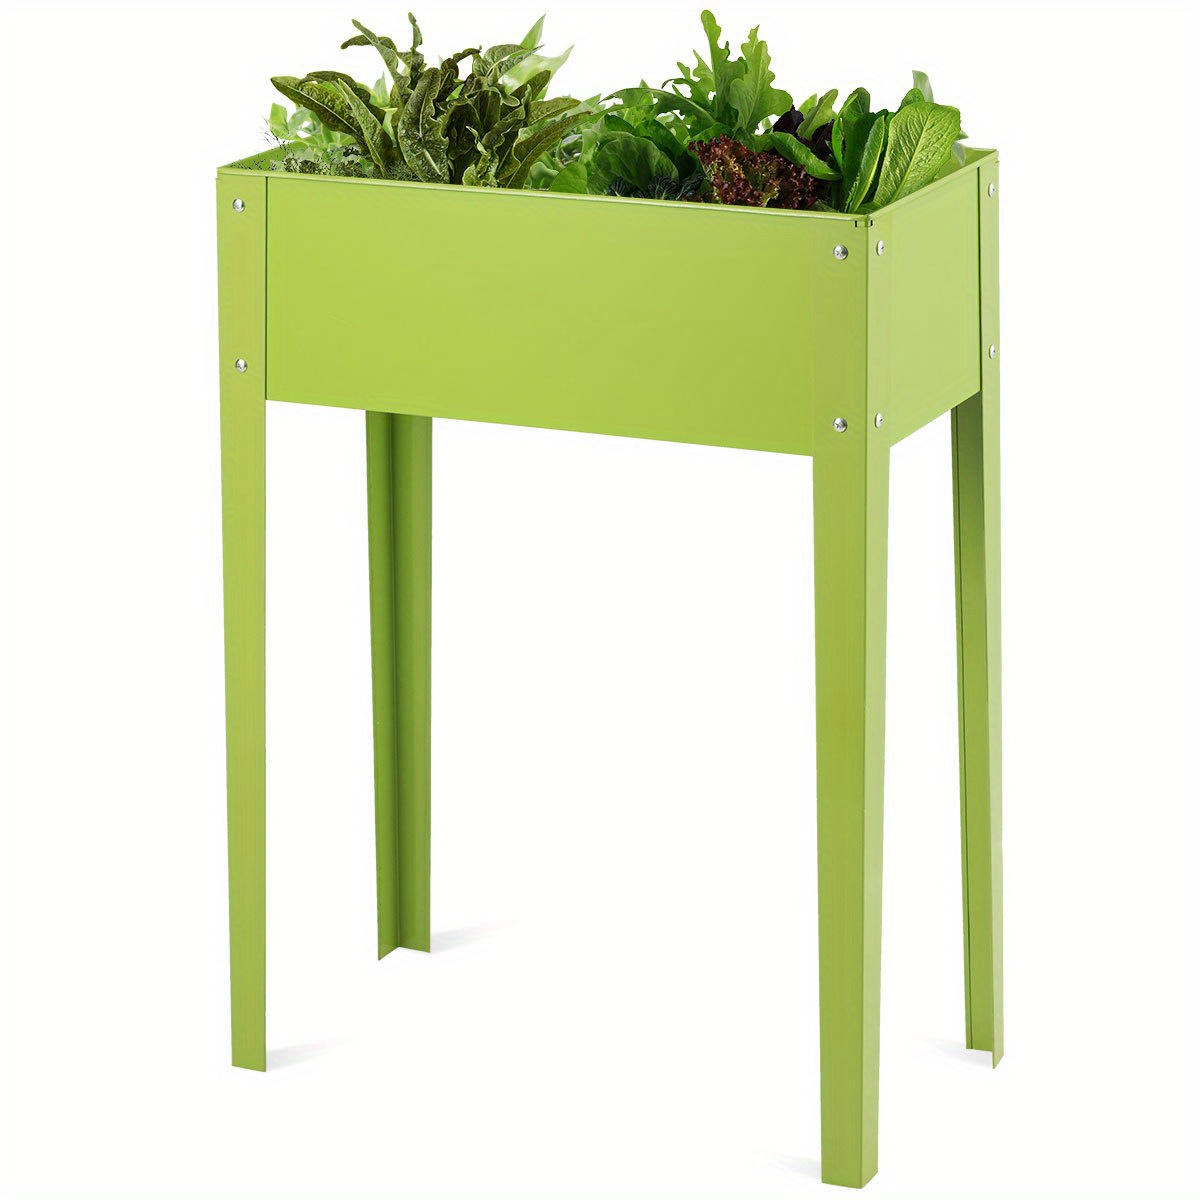 

Homasis 25" X13" Outdoor Elevated Garden Plant Stand Raised Tall Flower Bed Box New